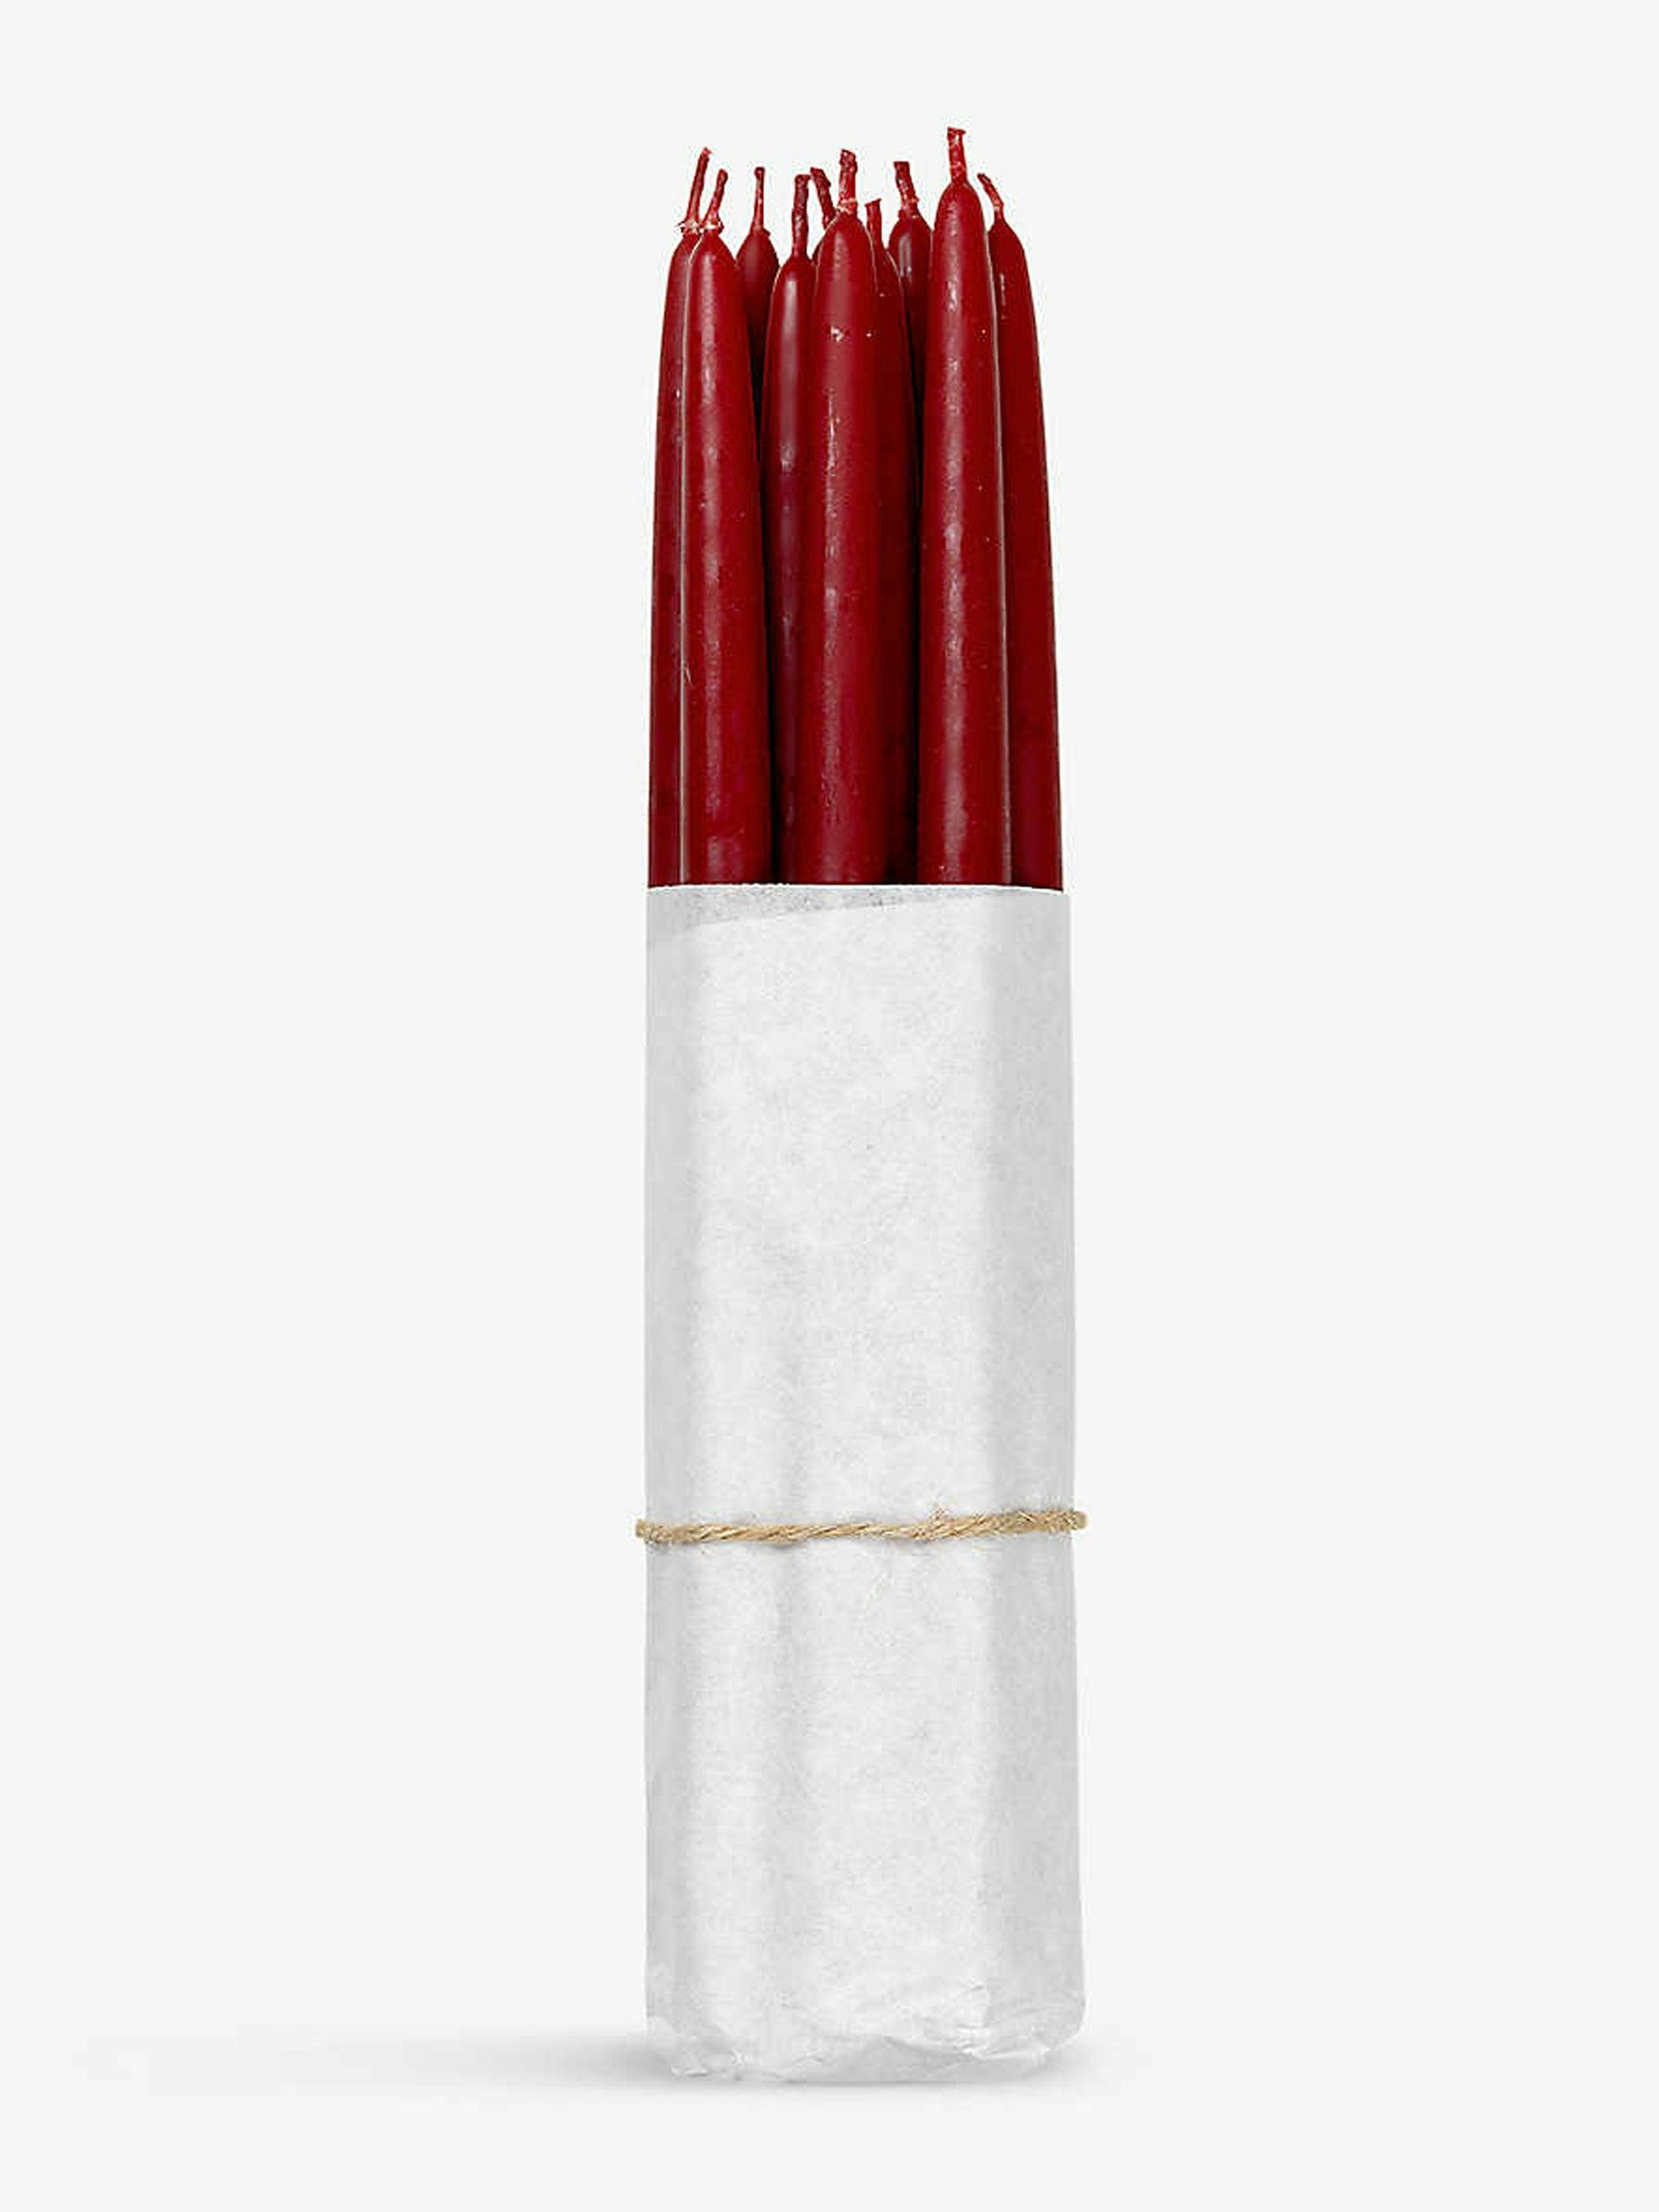 Hand-dipped burgundy candles (set of 12)